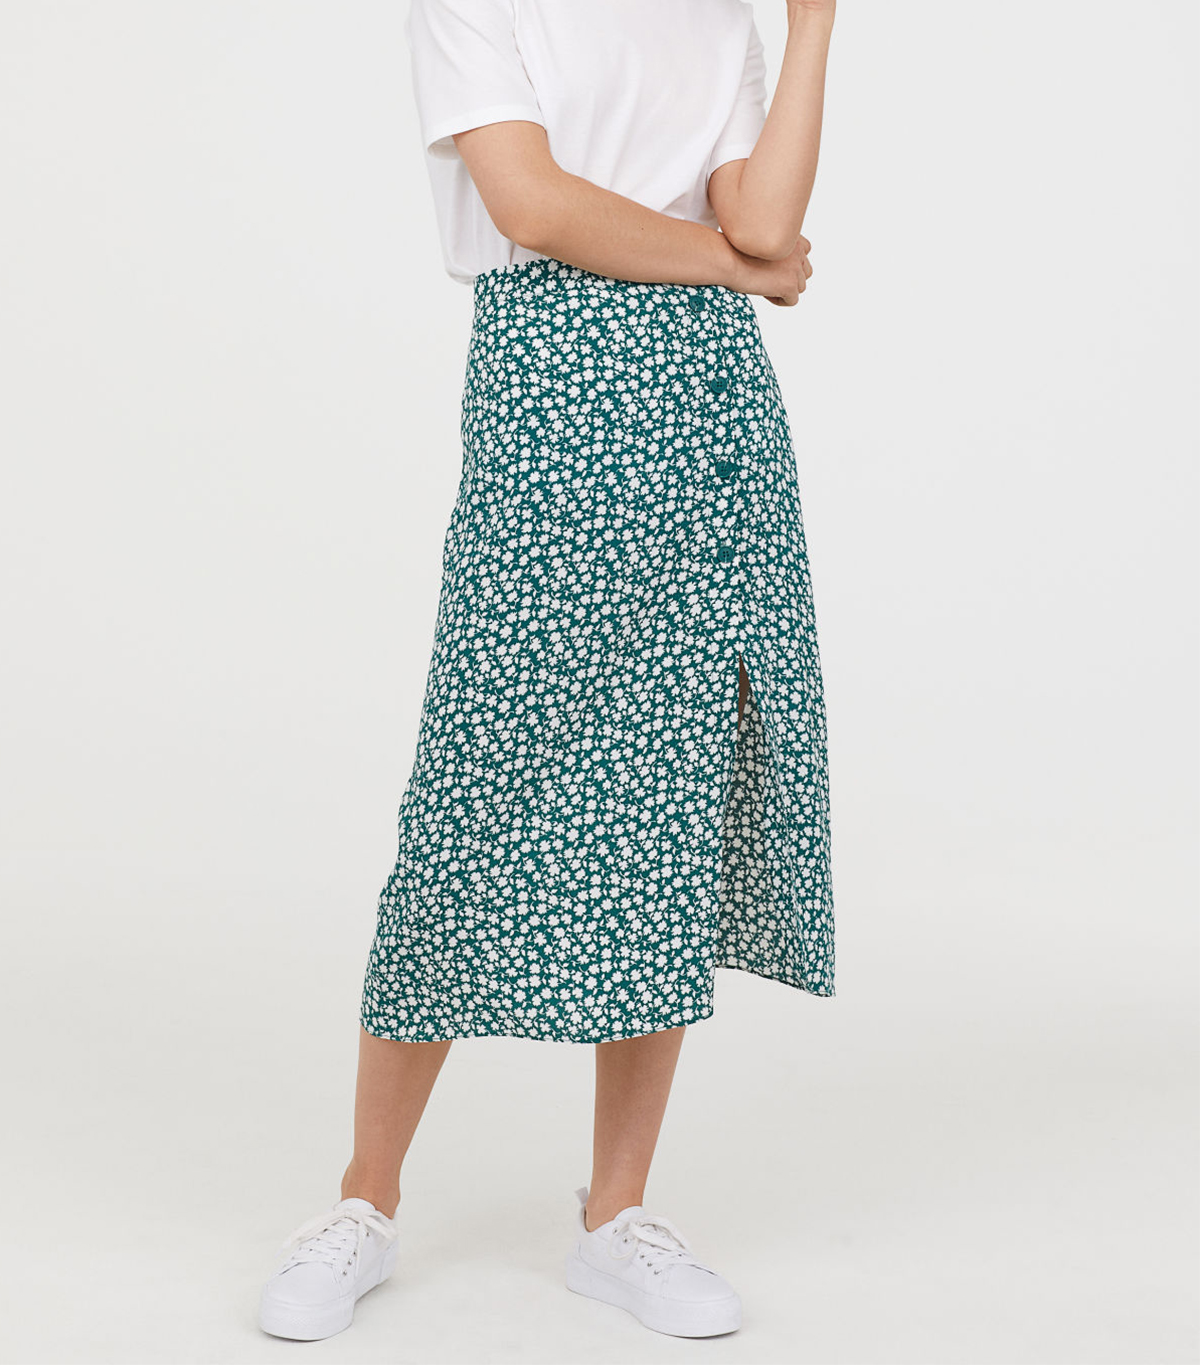 These Are the Very Best Slip Skirts | Who What Wear